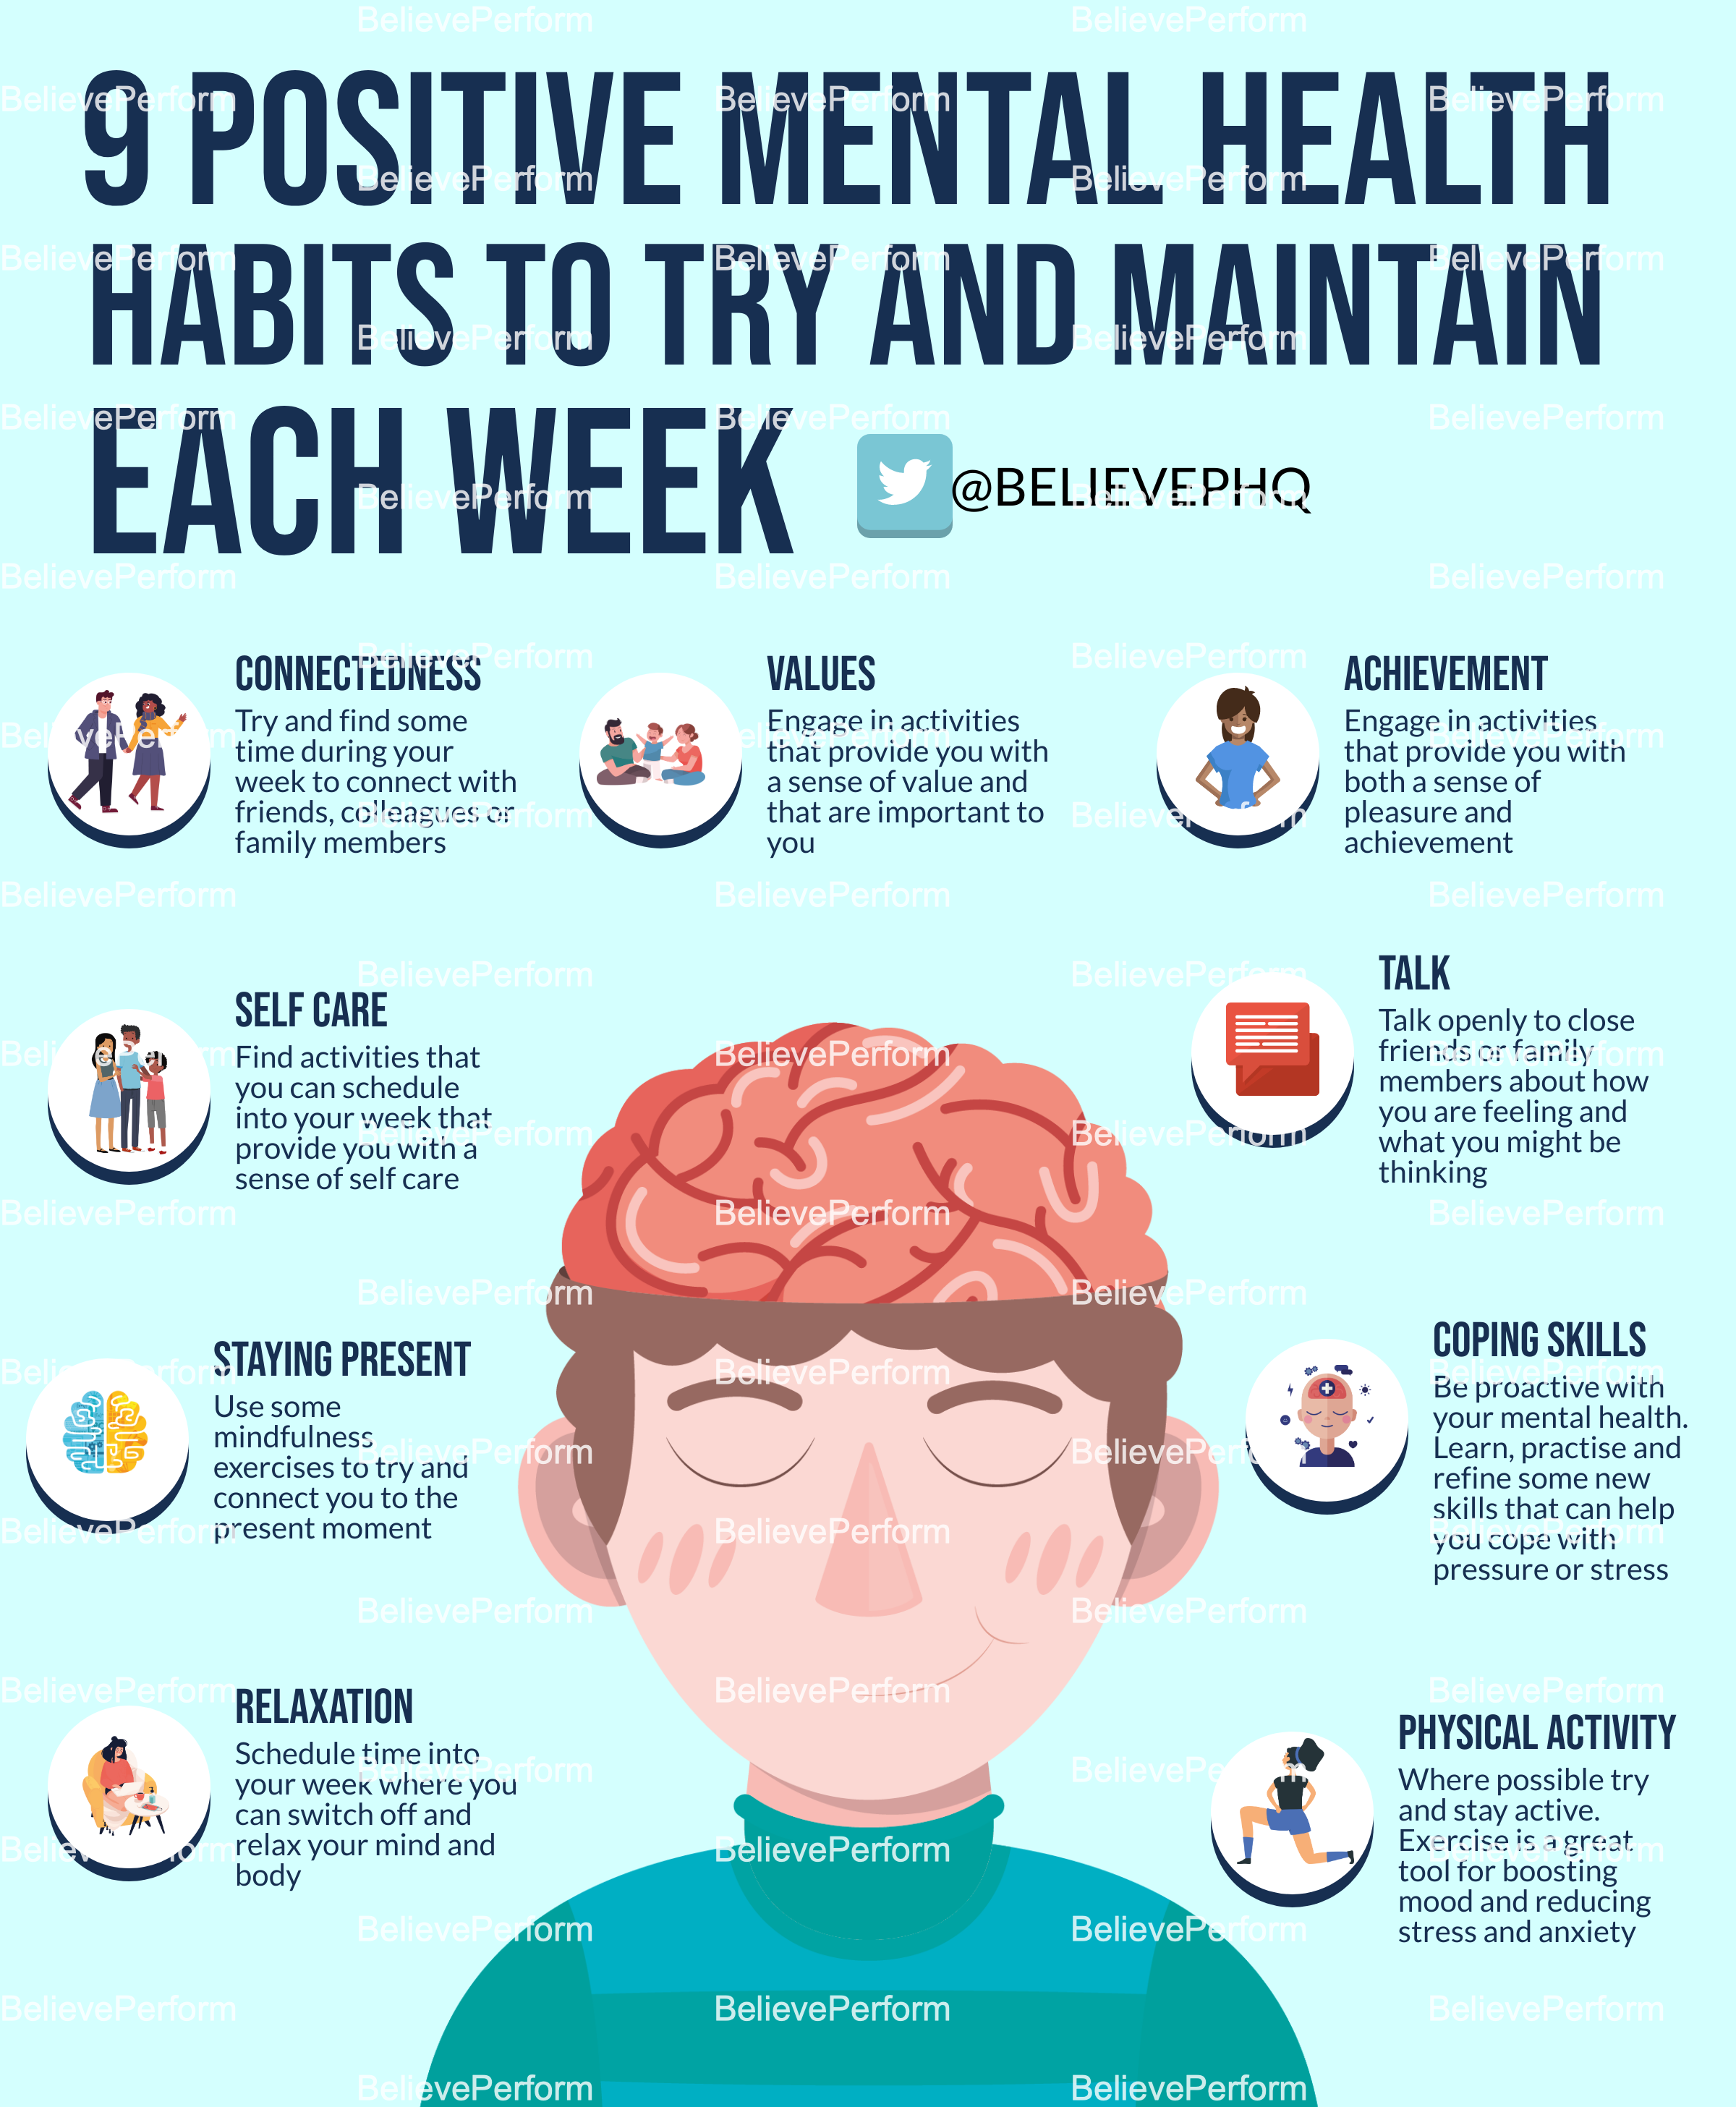 9 positive mental health habits to try and maintain each week